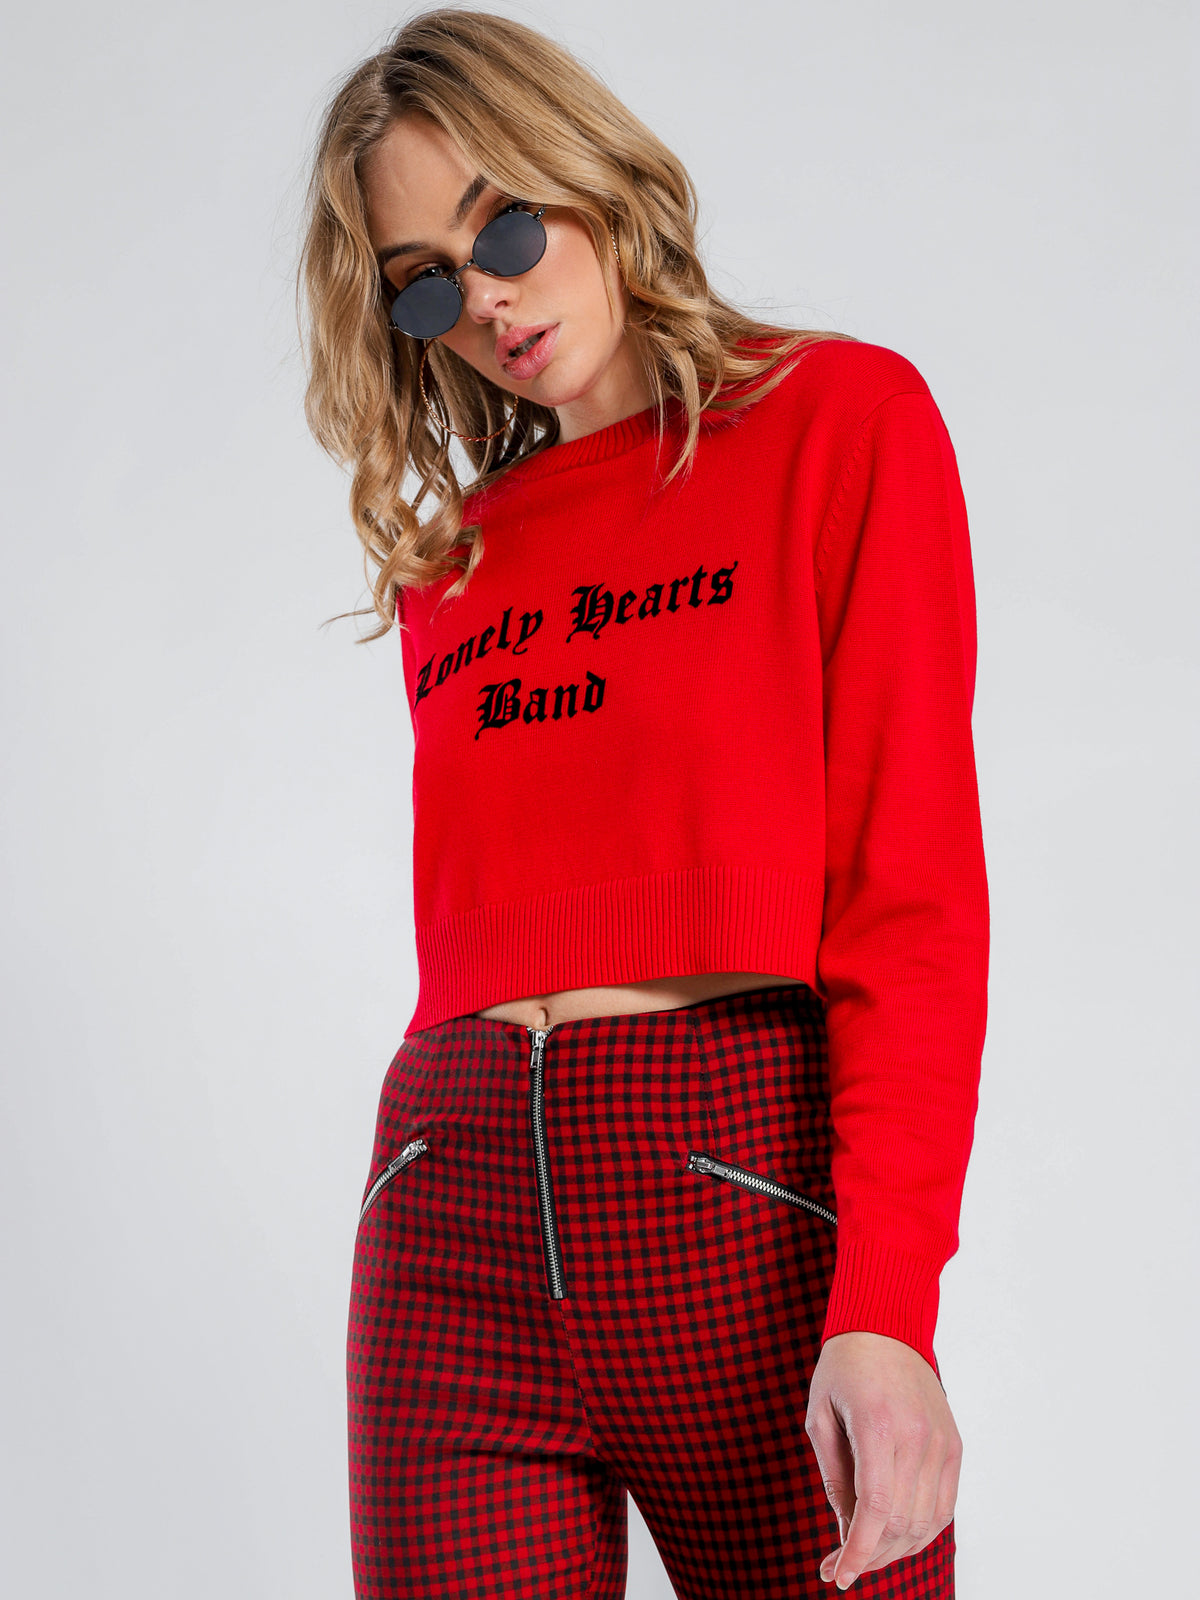 Lonely Hearts Knit Jumper in Red